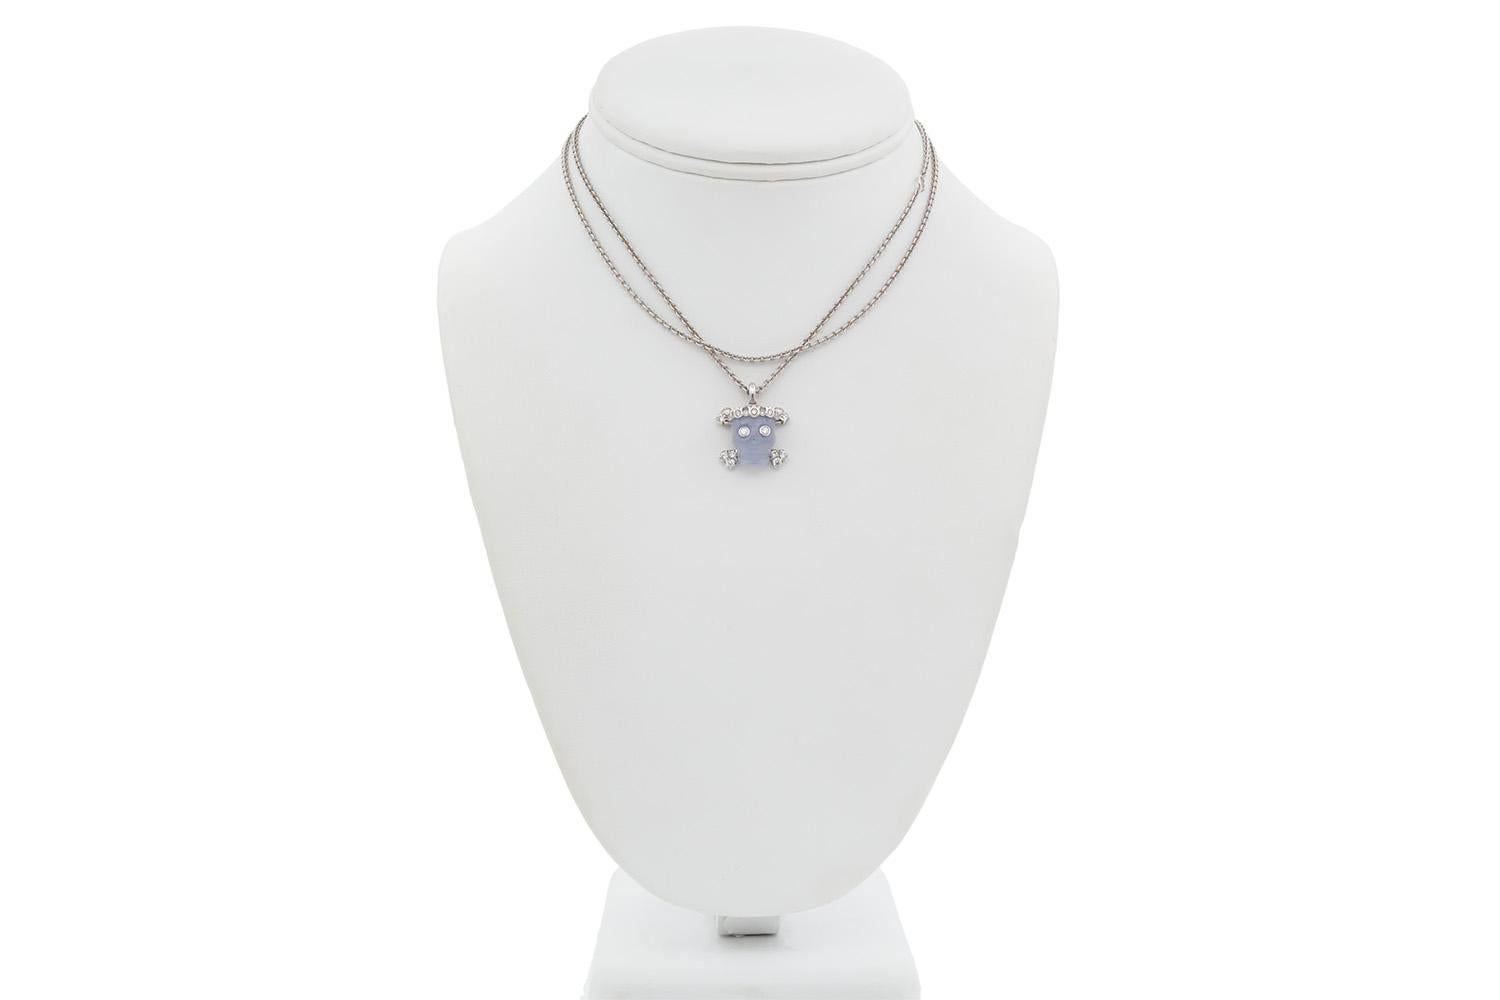 We are  pleased to present this Dior TÊTE DE MORT Skull Necklace, original retial $12,730. This beautiful piece is fashioned from 18k white gold and features a 0.44ct round brilliant cut diamond and a blue chalcedony skull pendant on a 18k white